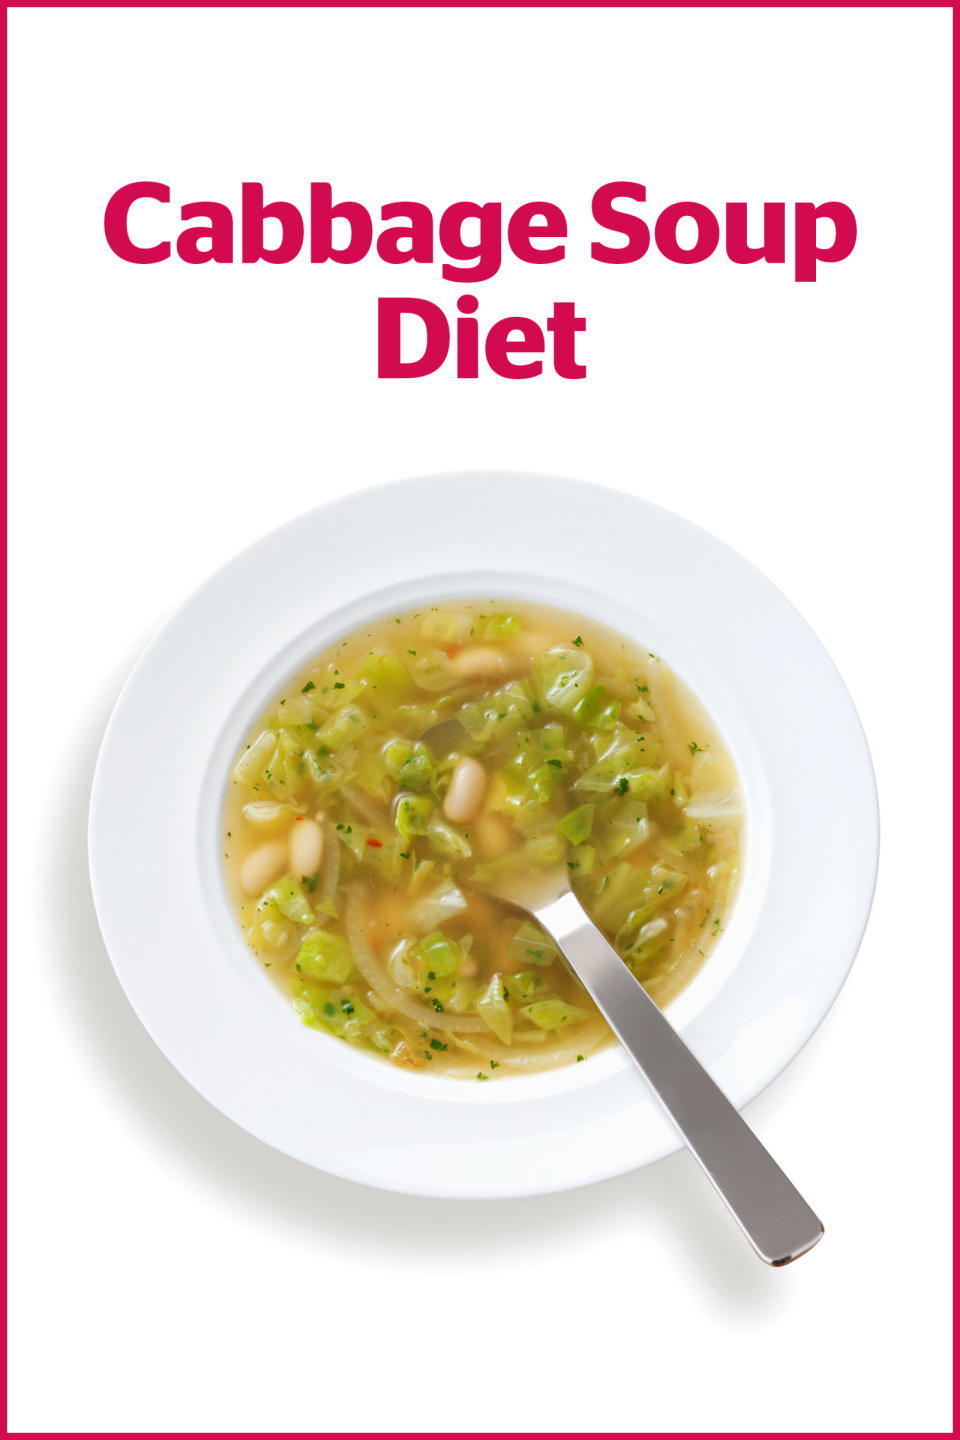 3) The Cabbage Soup Diet is Basically Zero Fun